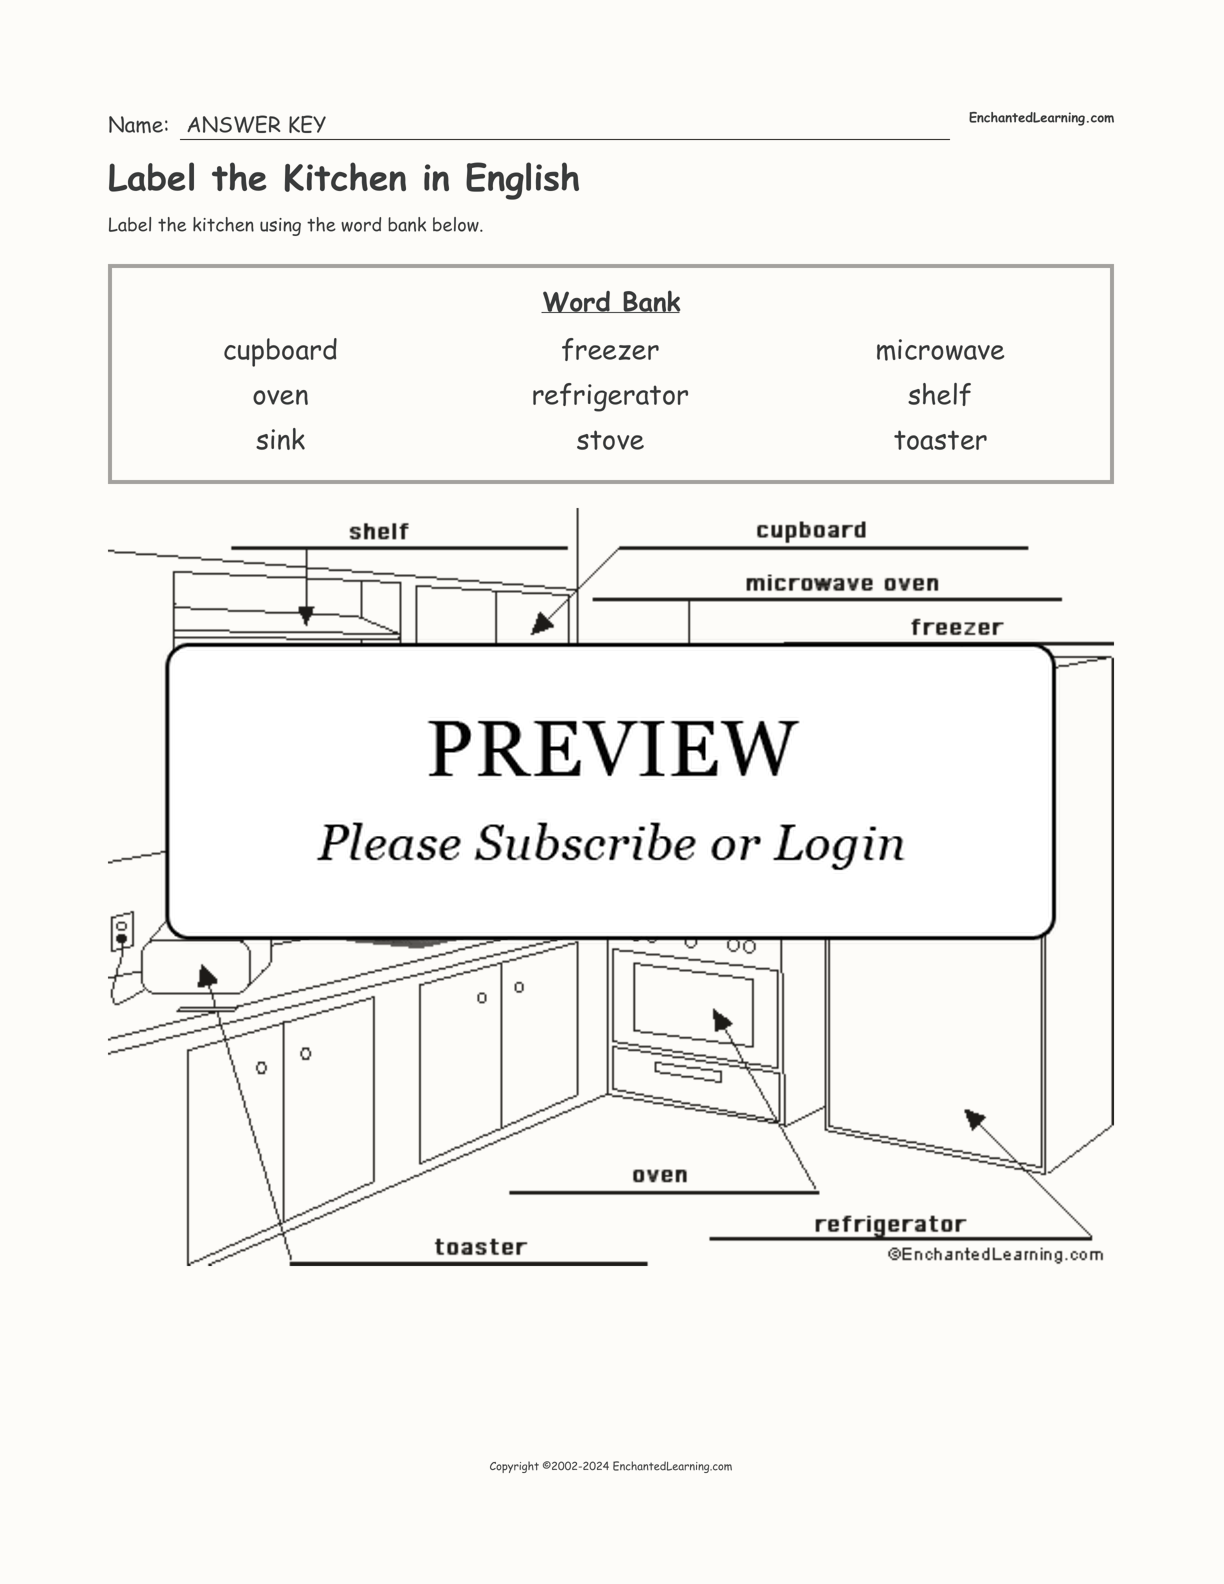 Label the Kitchen in English interactive worksheet page 2